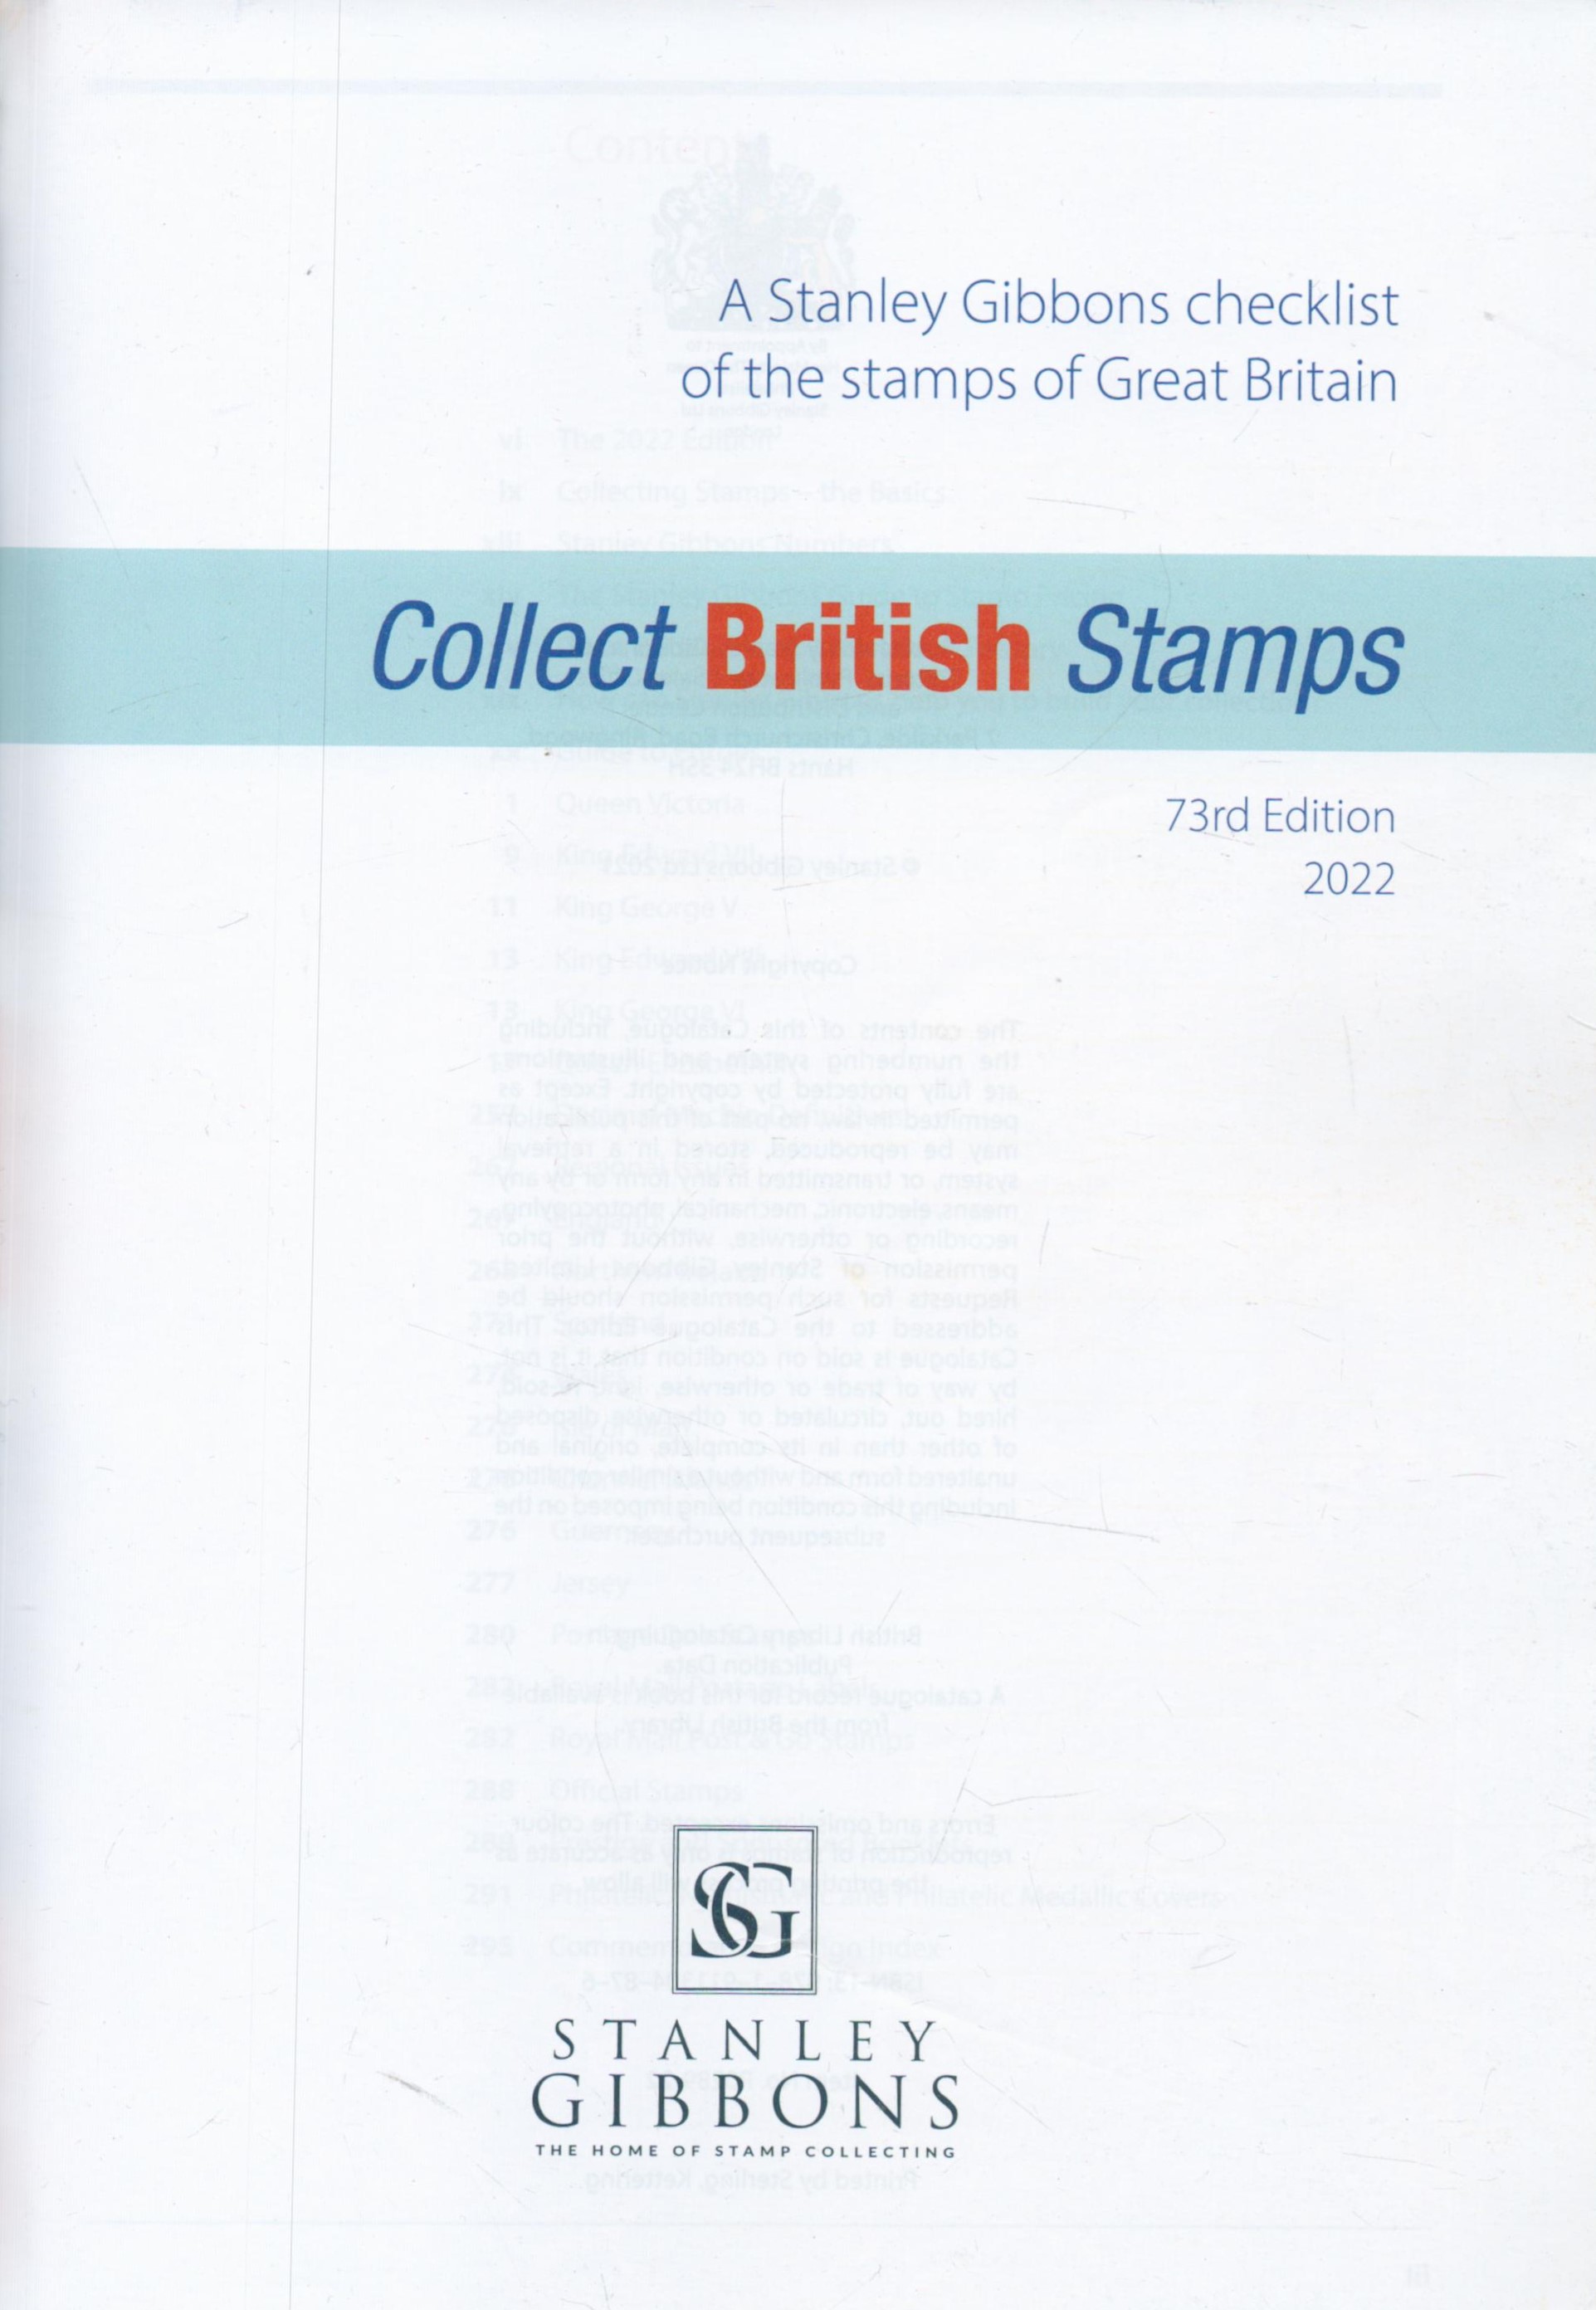 Stanley Gibbons Stamp Catalogue - Great Britain 23rd Edition Softback Catalogue 2022 with 326 pages. - Image 2 of 3